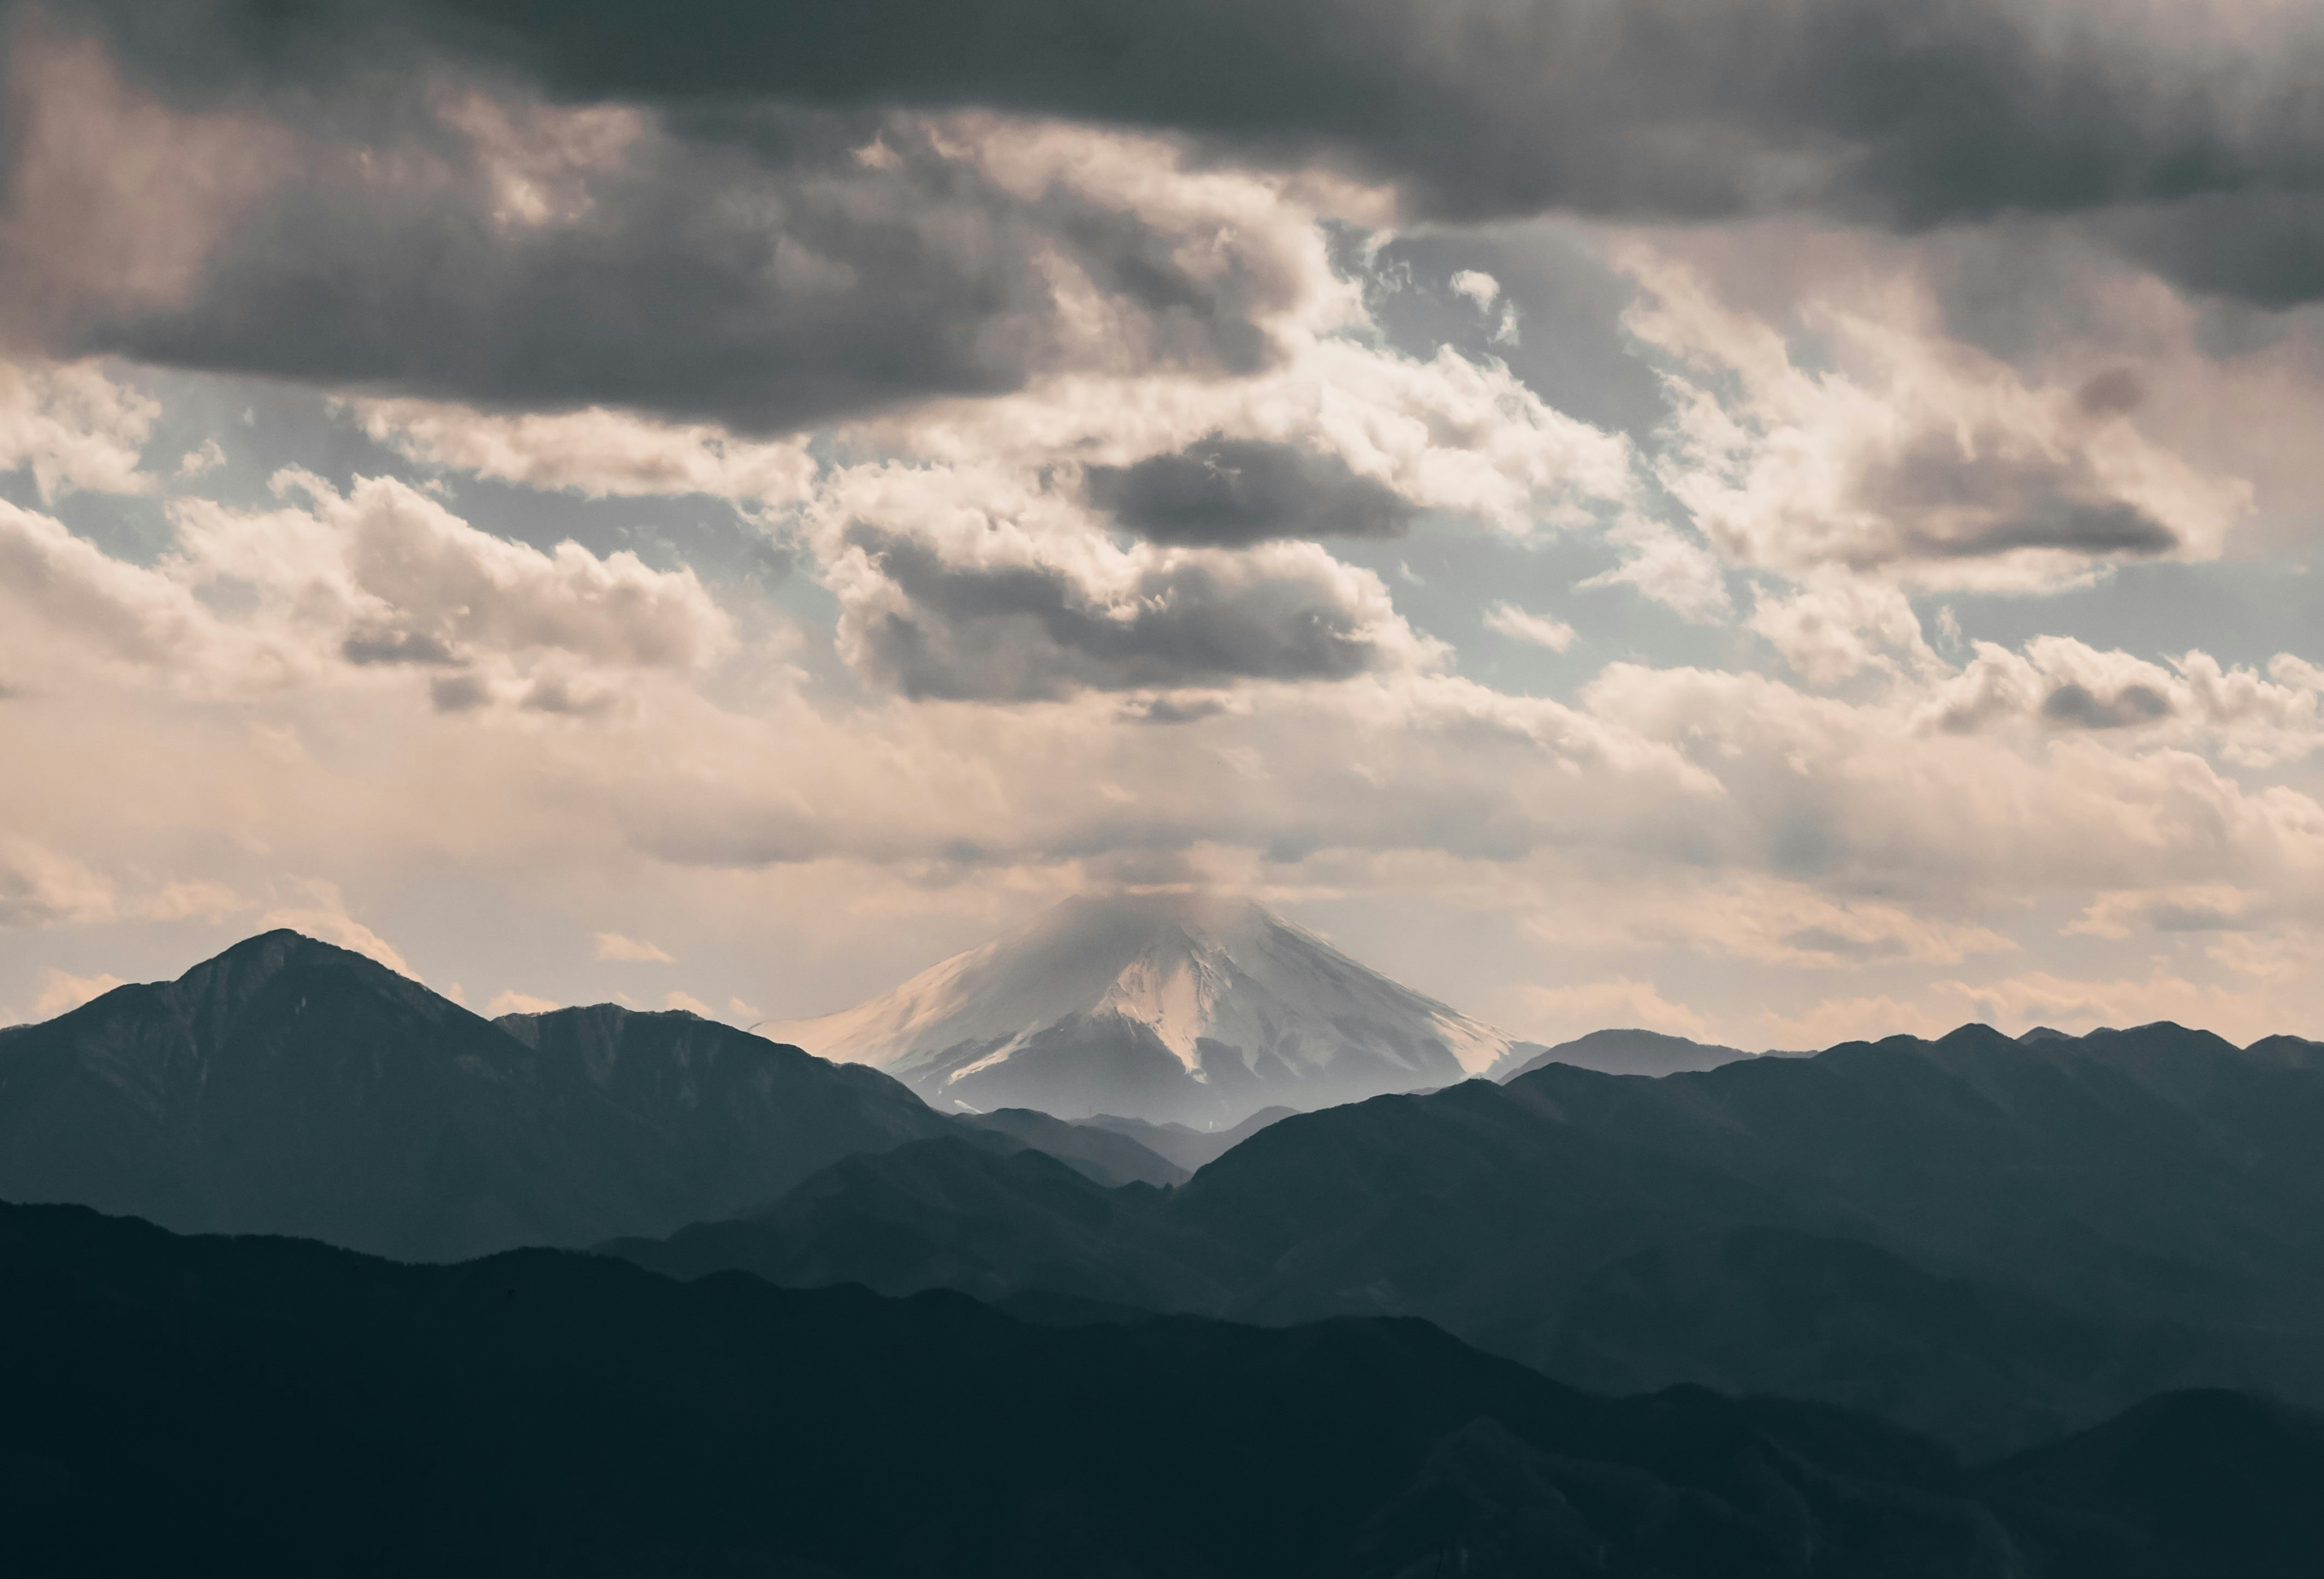 A distant view of Mt Fuji from Mt Takao. The iconic mountain rises above the surrounding hills and its snow-capped peak is enveloped by wispy white cloud.